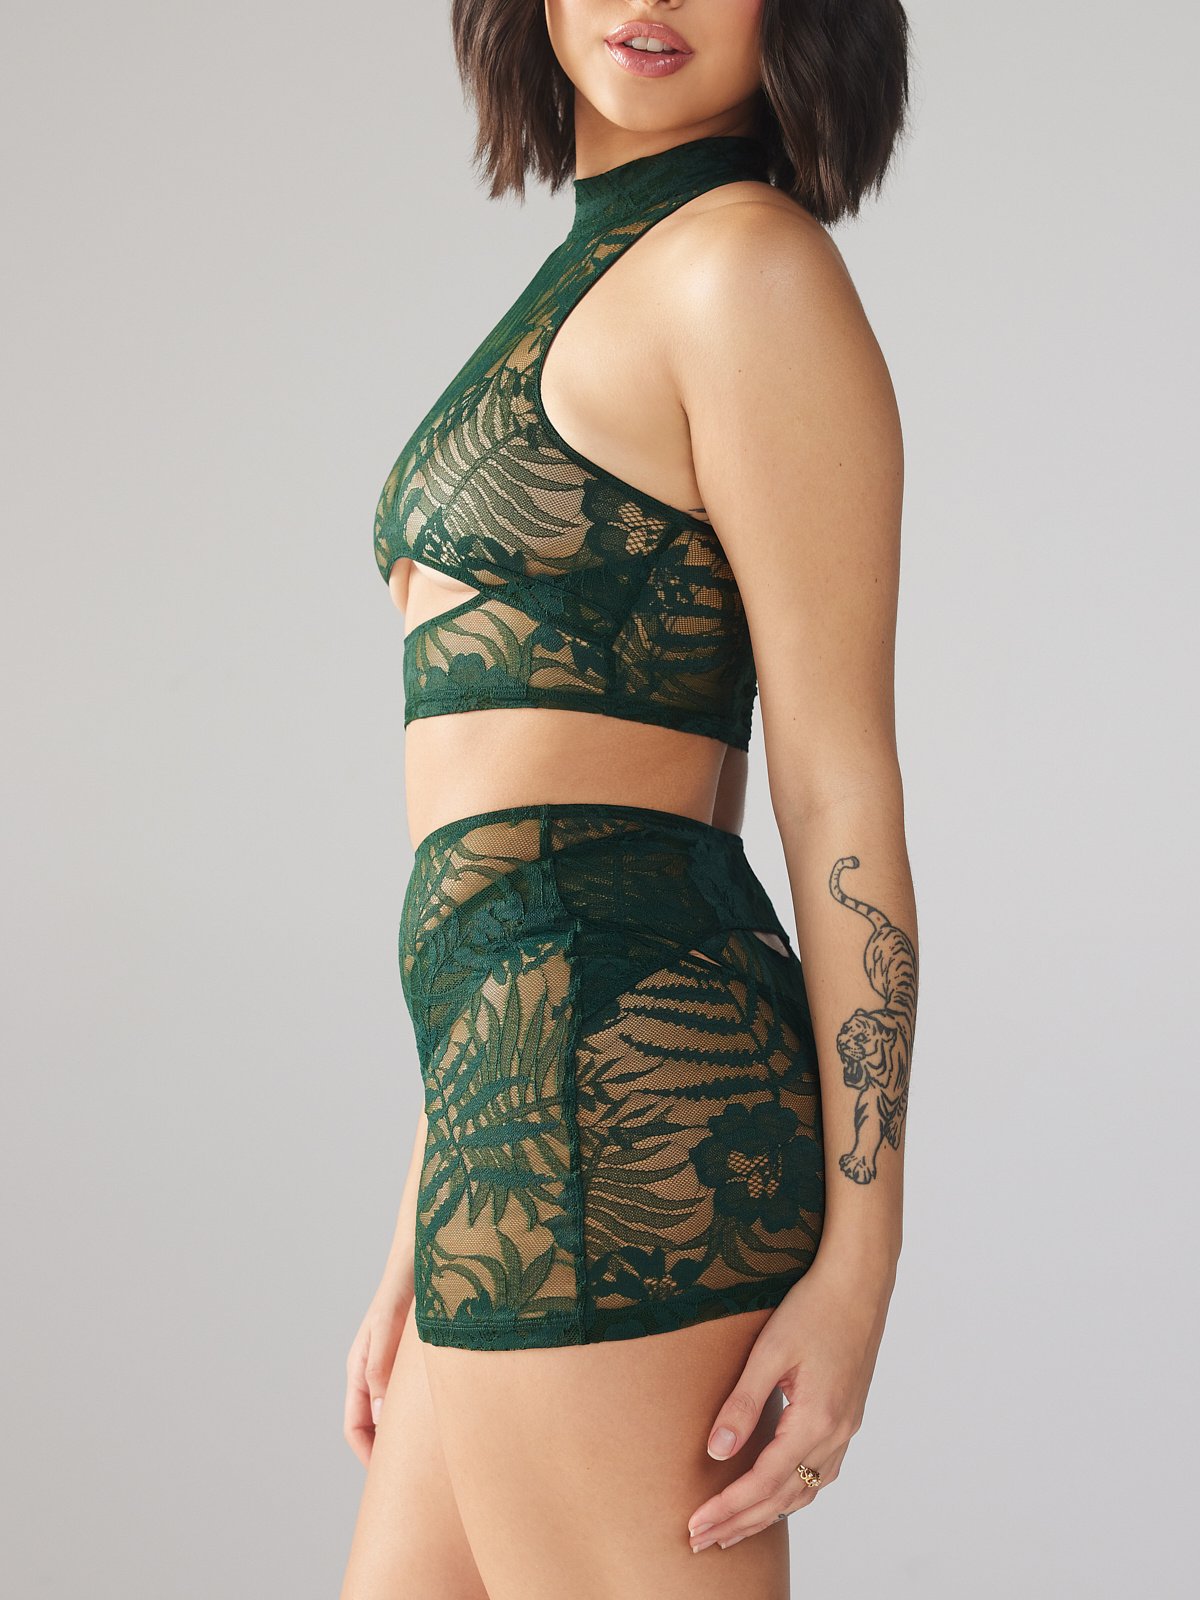 Shadowplay Lace Keyhole Skirt in Green